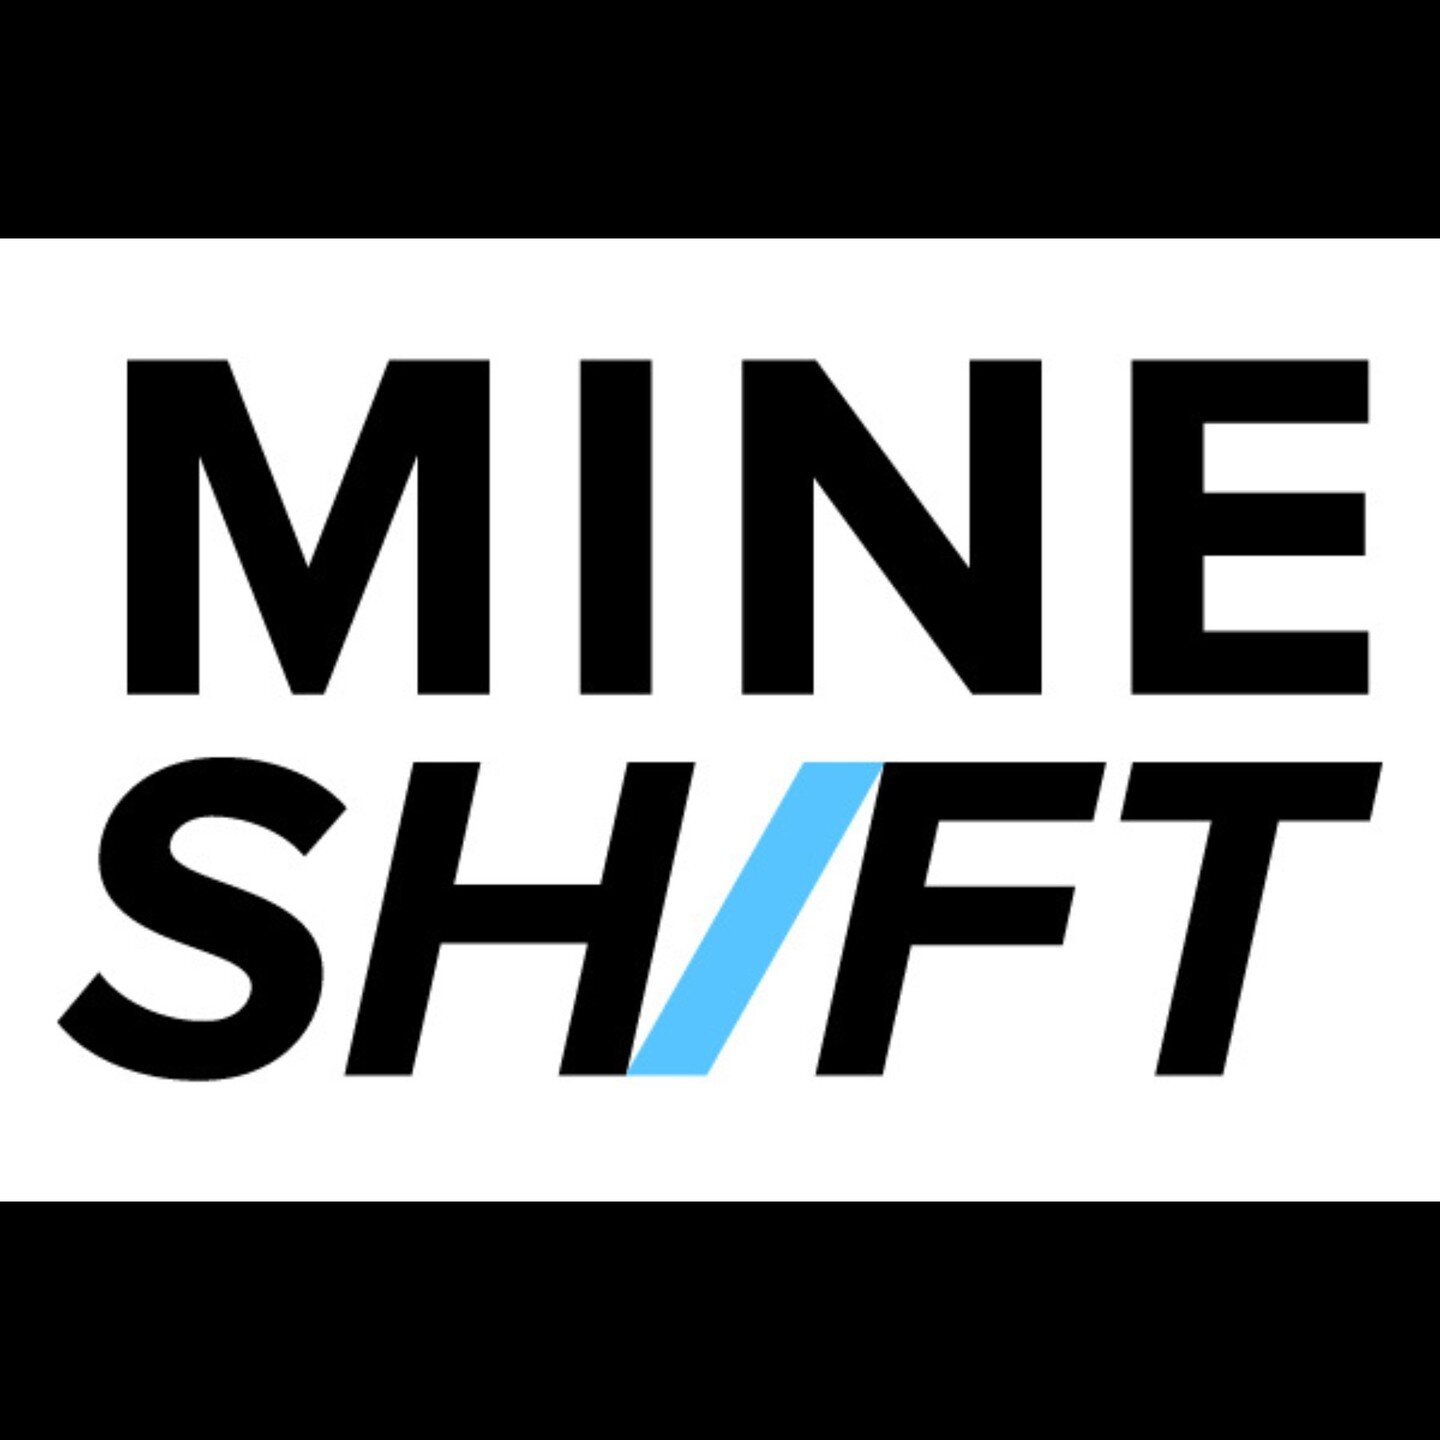 A shift is coming soon! #WatchThisSpace #ComingSoon #ShiftTheCulture #StayTuned #BigReveal #MoreToCome #WorkplaceSafety #AntiHarassment #ActiveBystander #DIGGER #MineShift